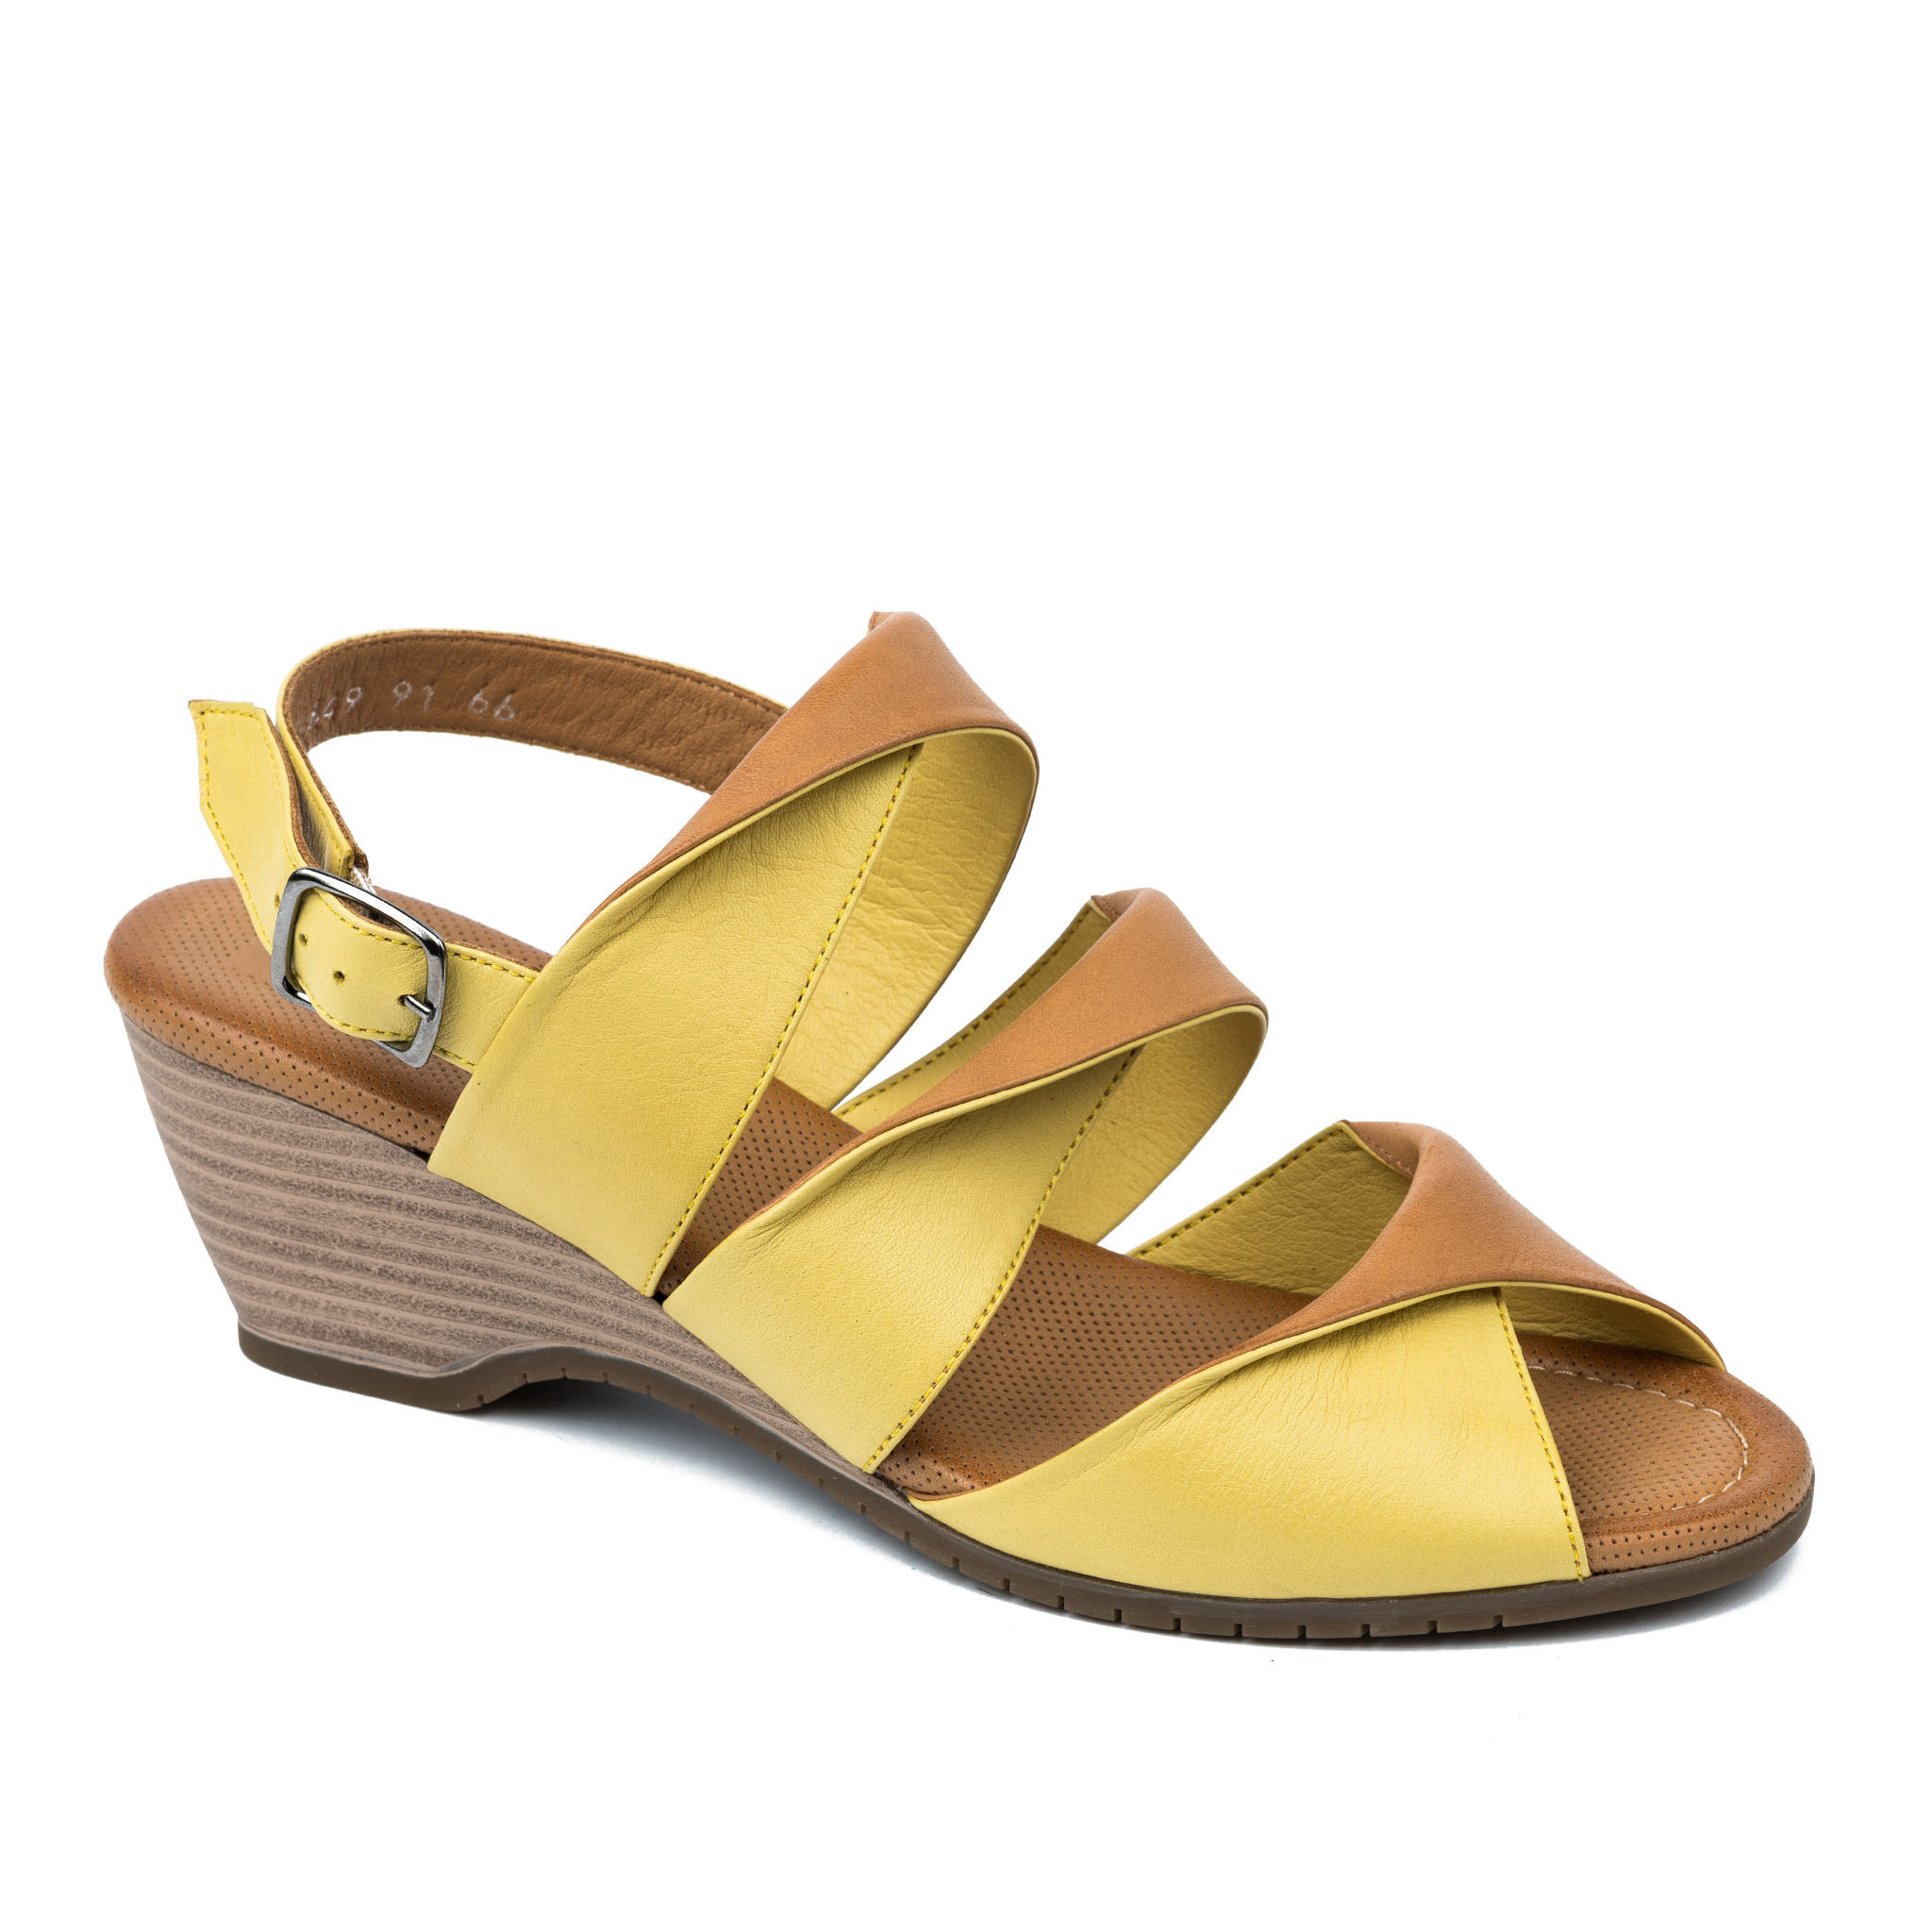 Leather sandals A709 - YELLOW